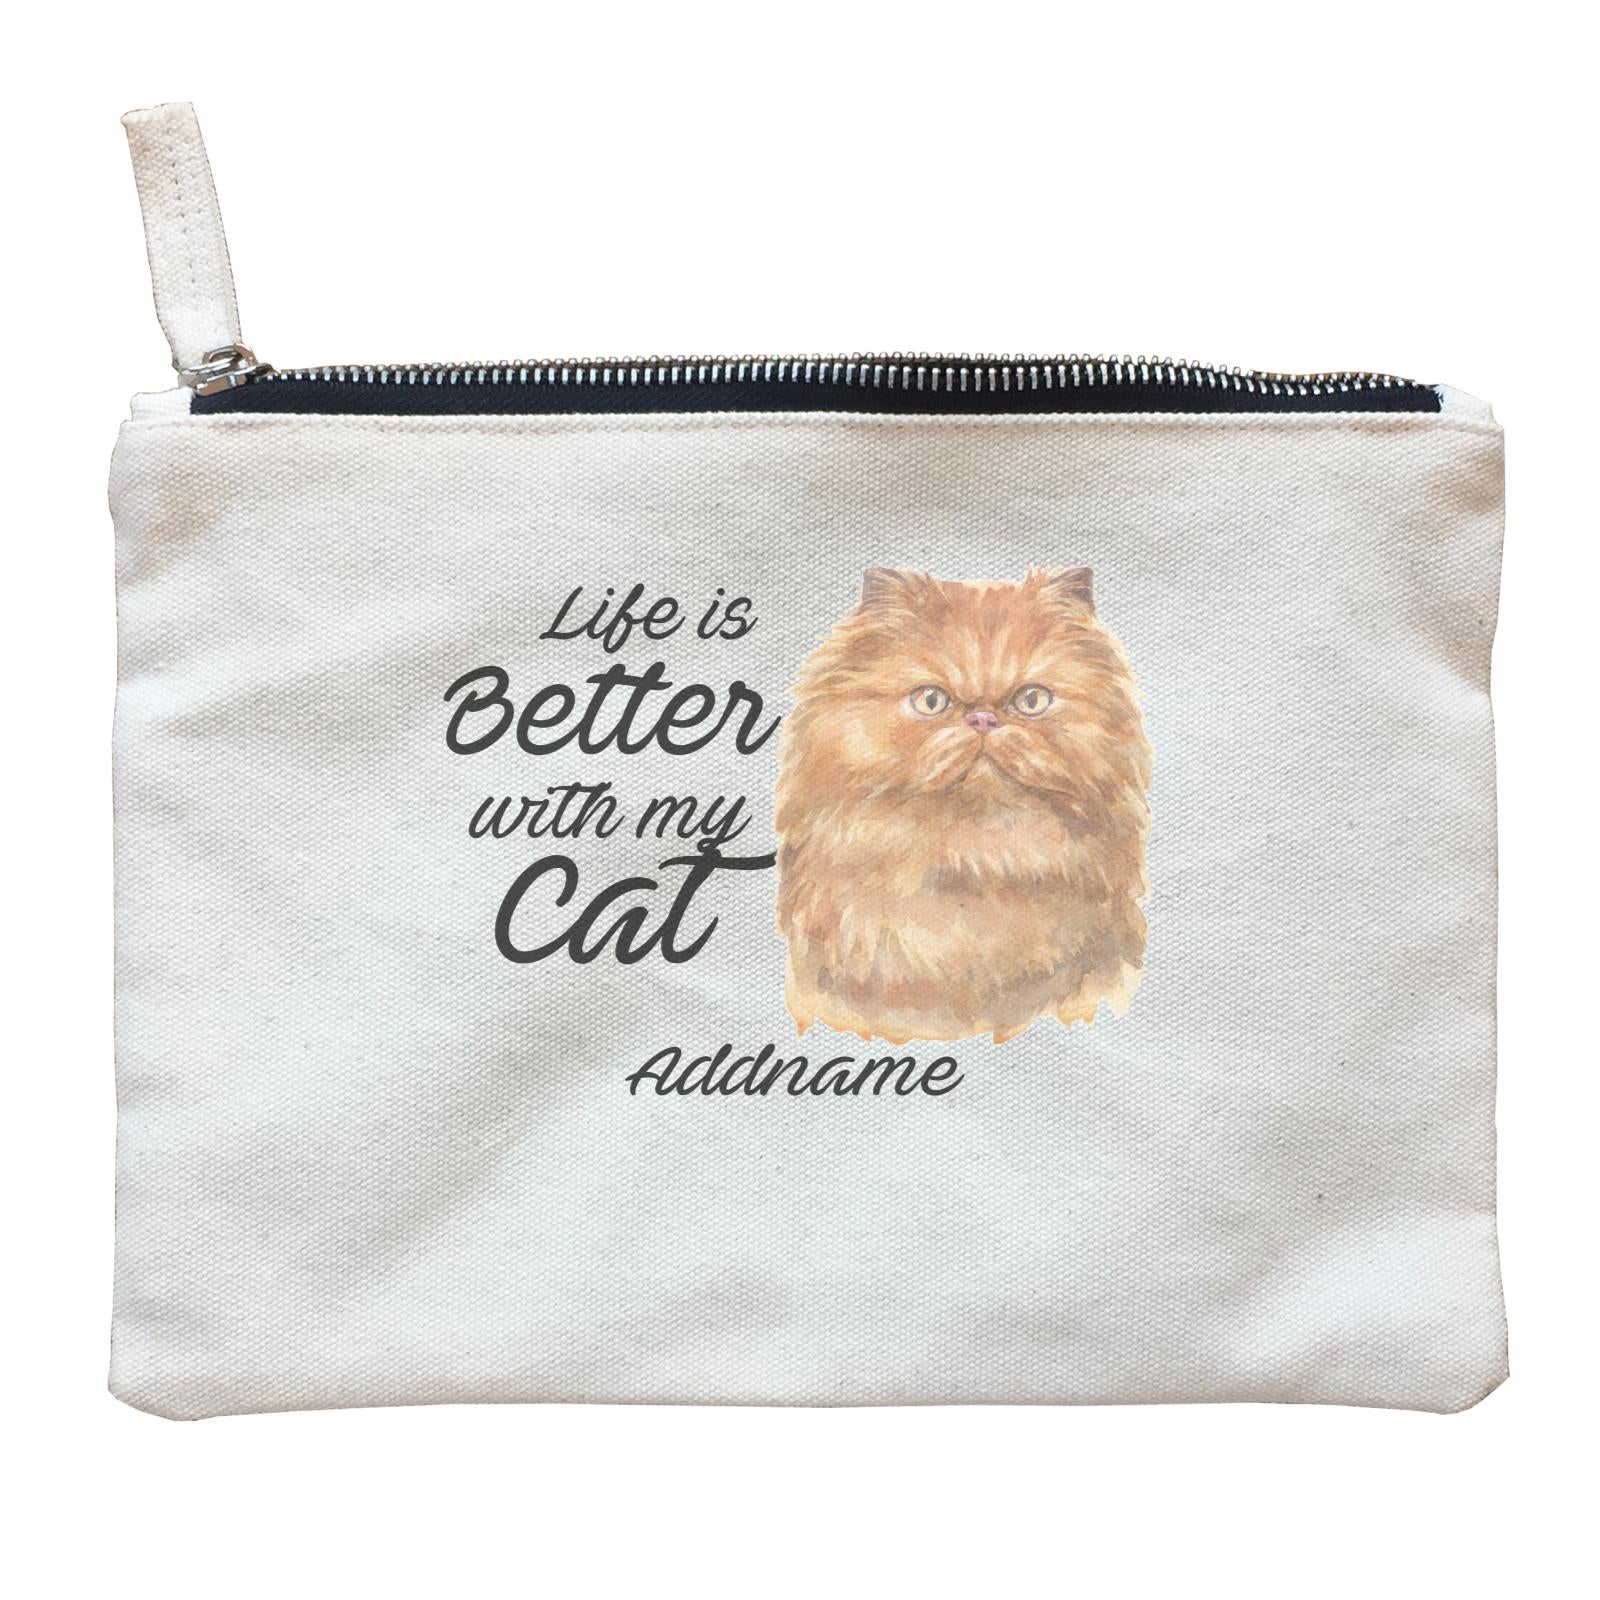 Watercolor Life is Better With My Cat Persian Brown cat Addname Zipper Pouch